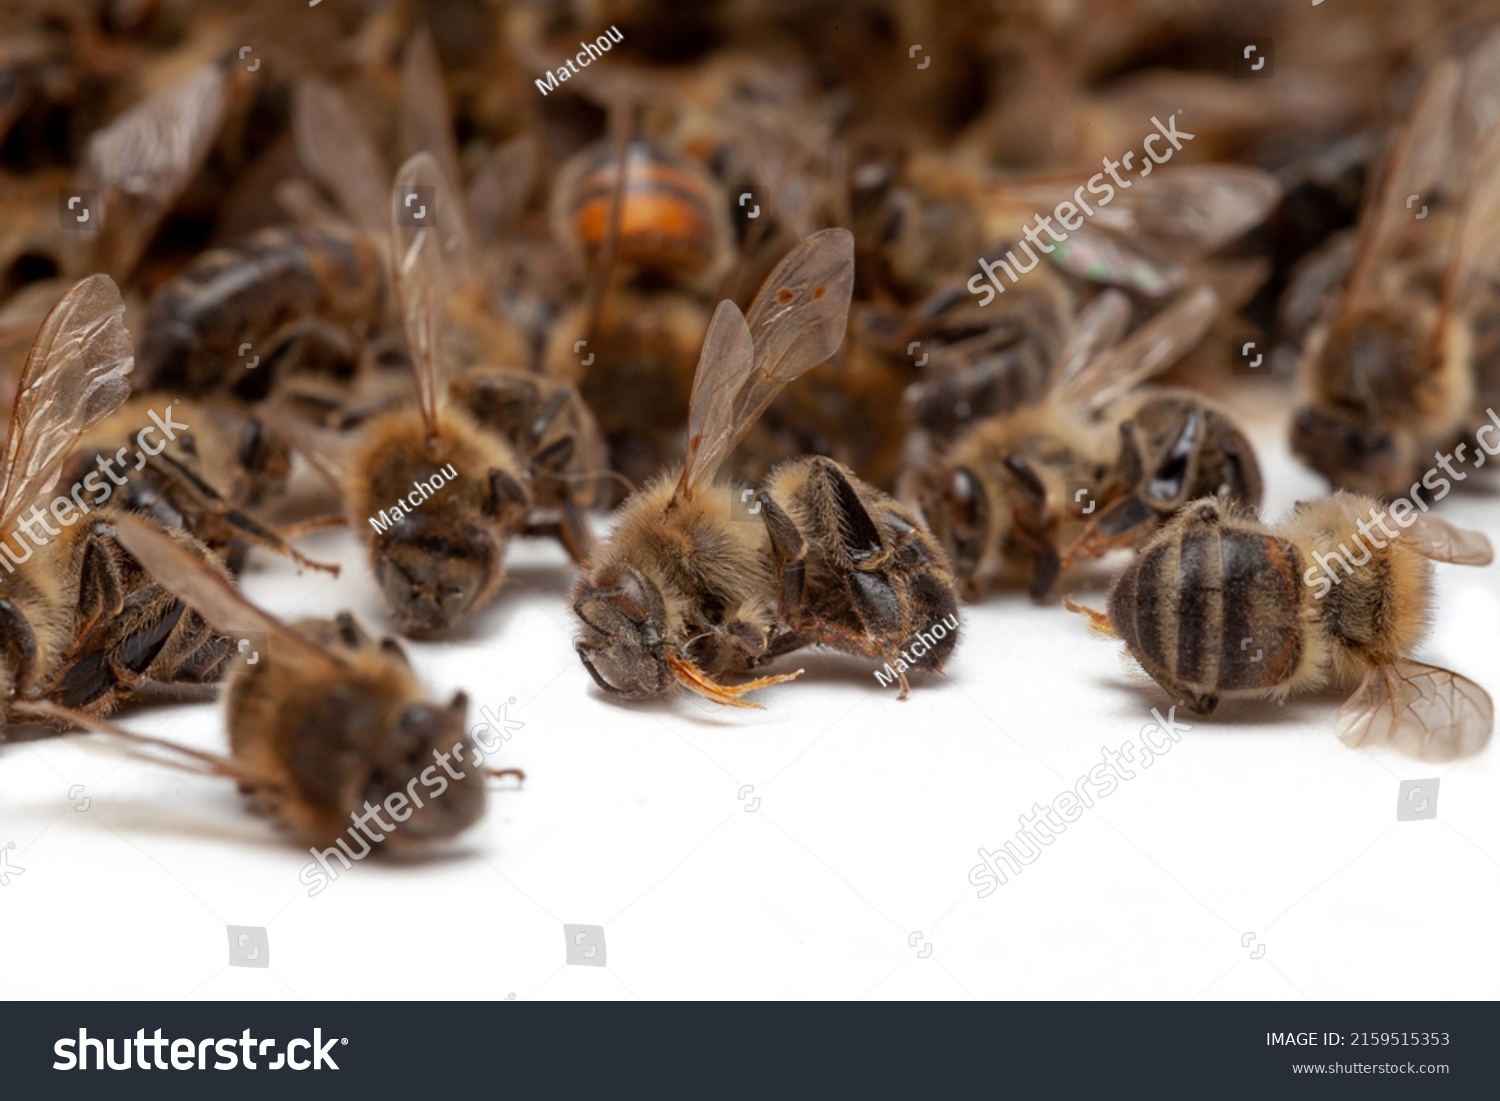 Beekeeping and disappearance of bees - Group of dead bees on a white background #2159515353